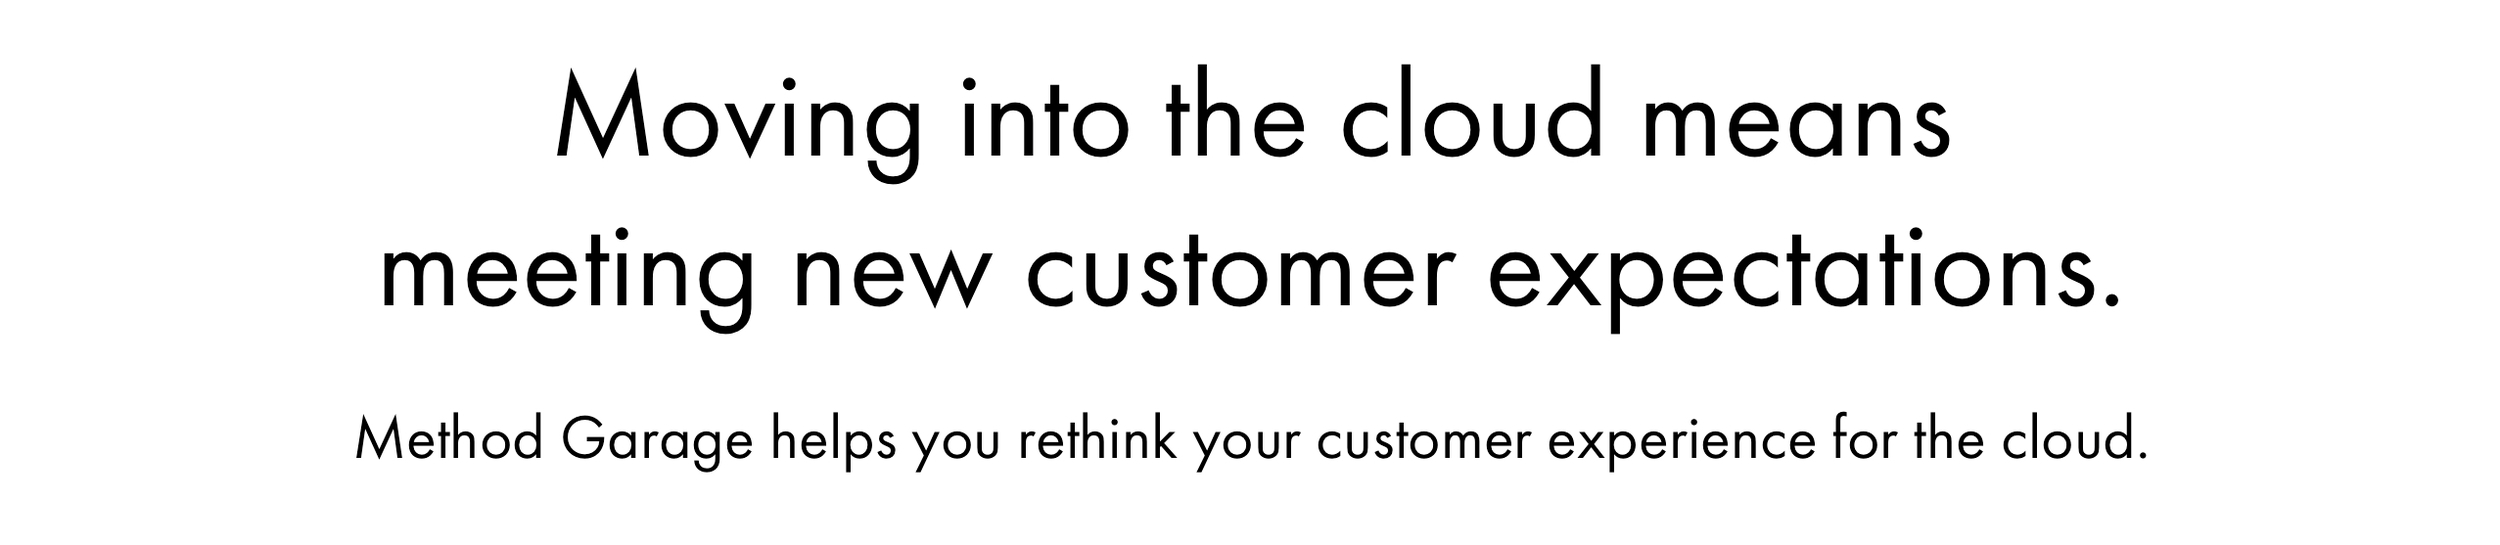 Moving into the cloud.jpg